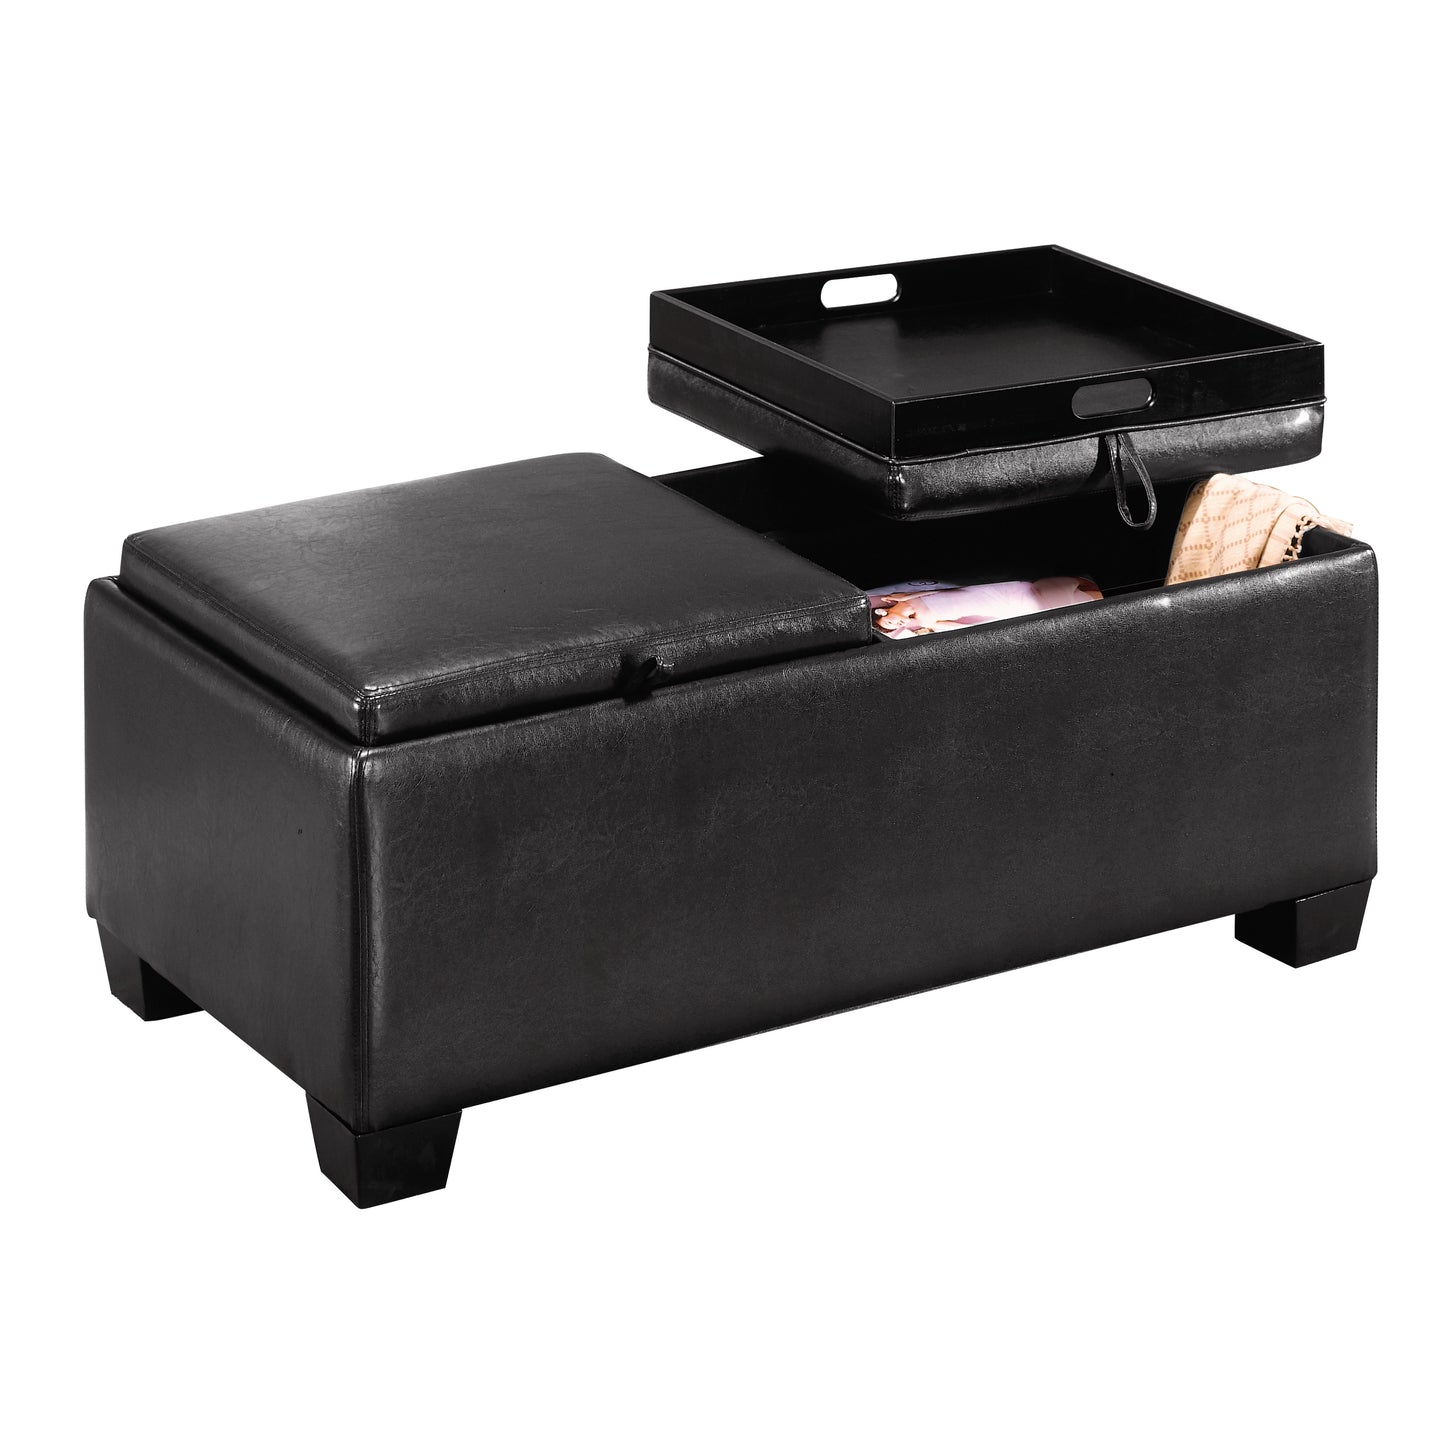 Vega Storage Cocktail Ottoman ONE COLOR ONLY